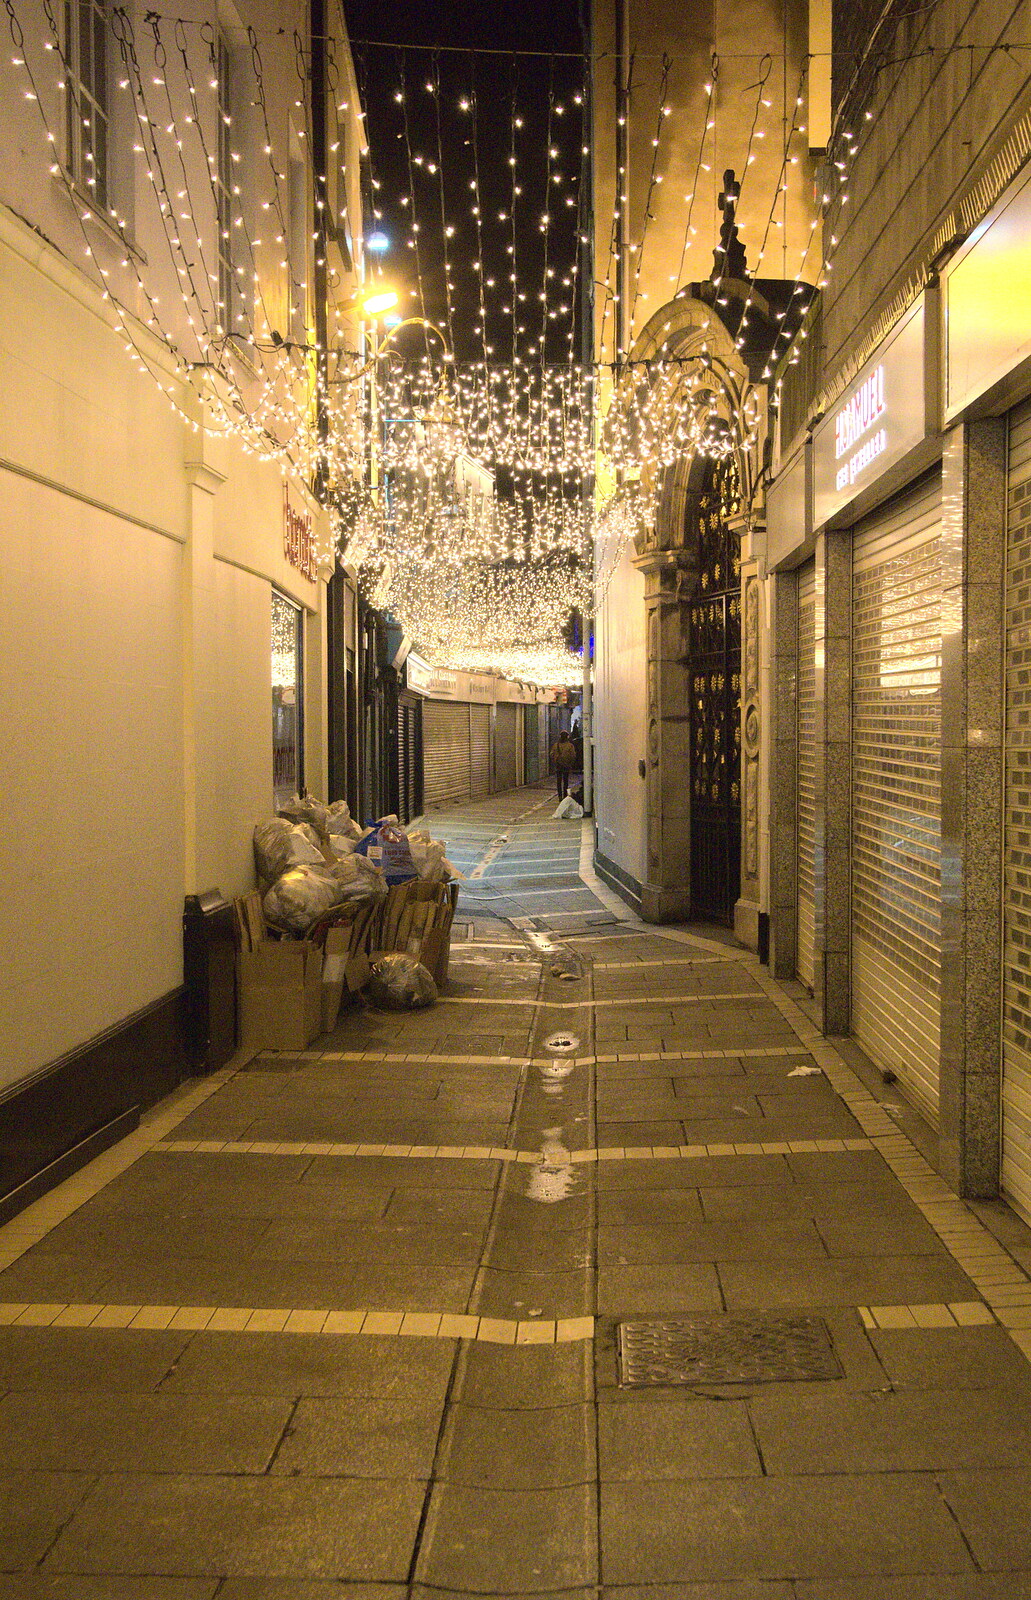 Even the side streets have Christmas lighting from A Night on the Lash, Dublin, Ireland - 14th December 2012